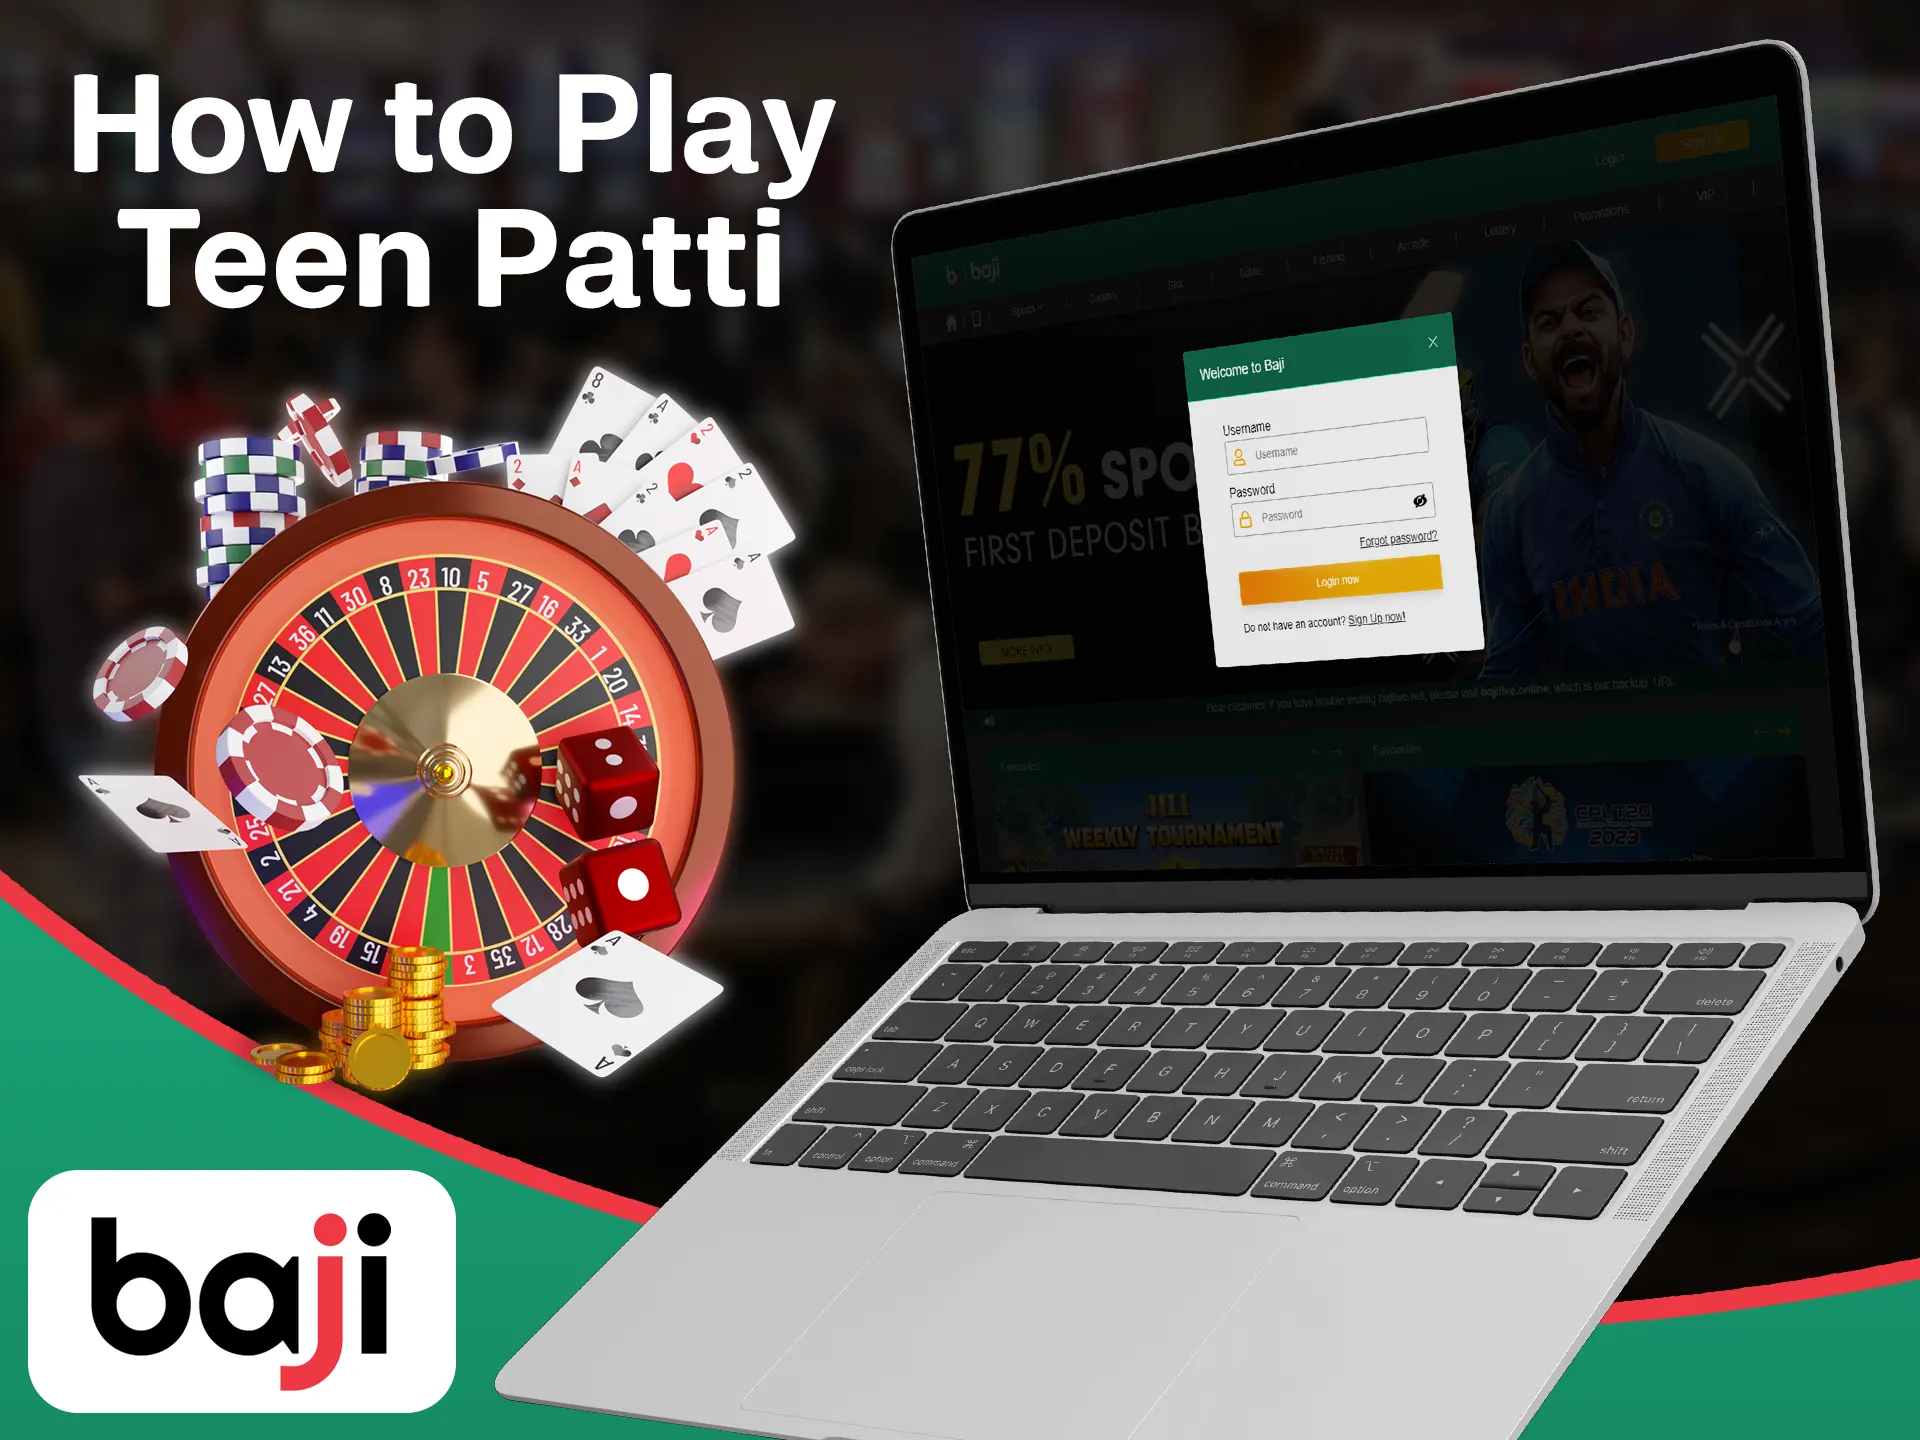 It's easy to play a teen patti game at the Baji.